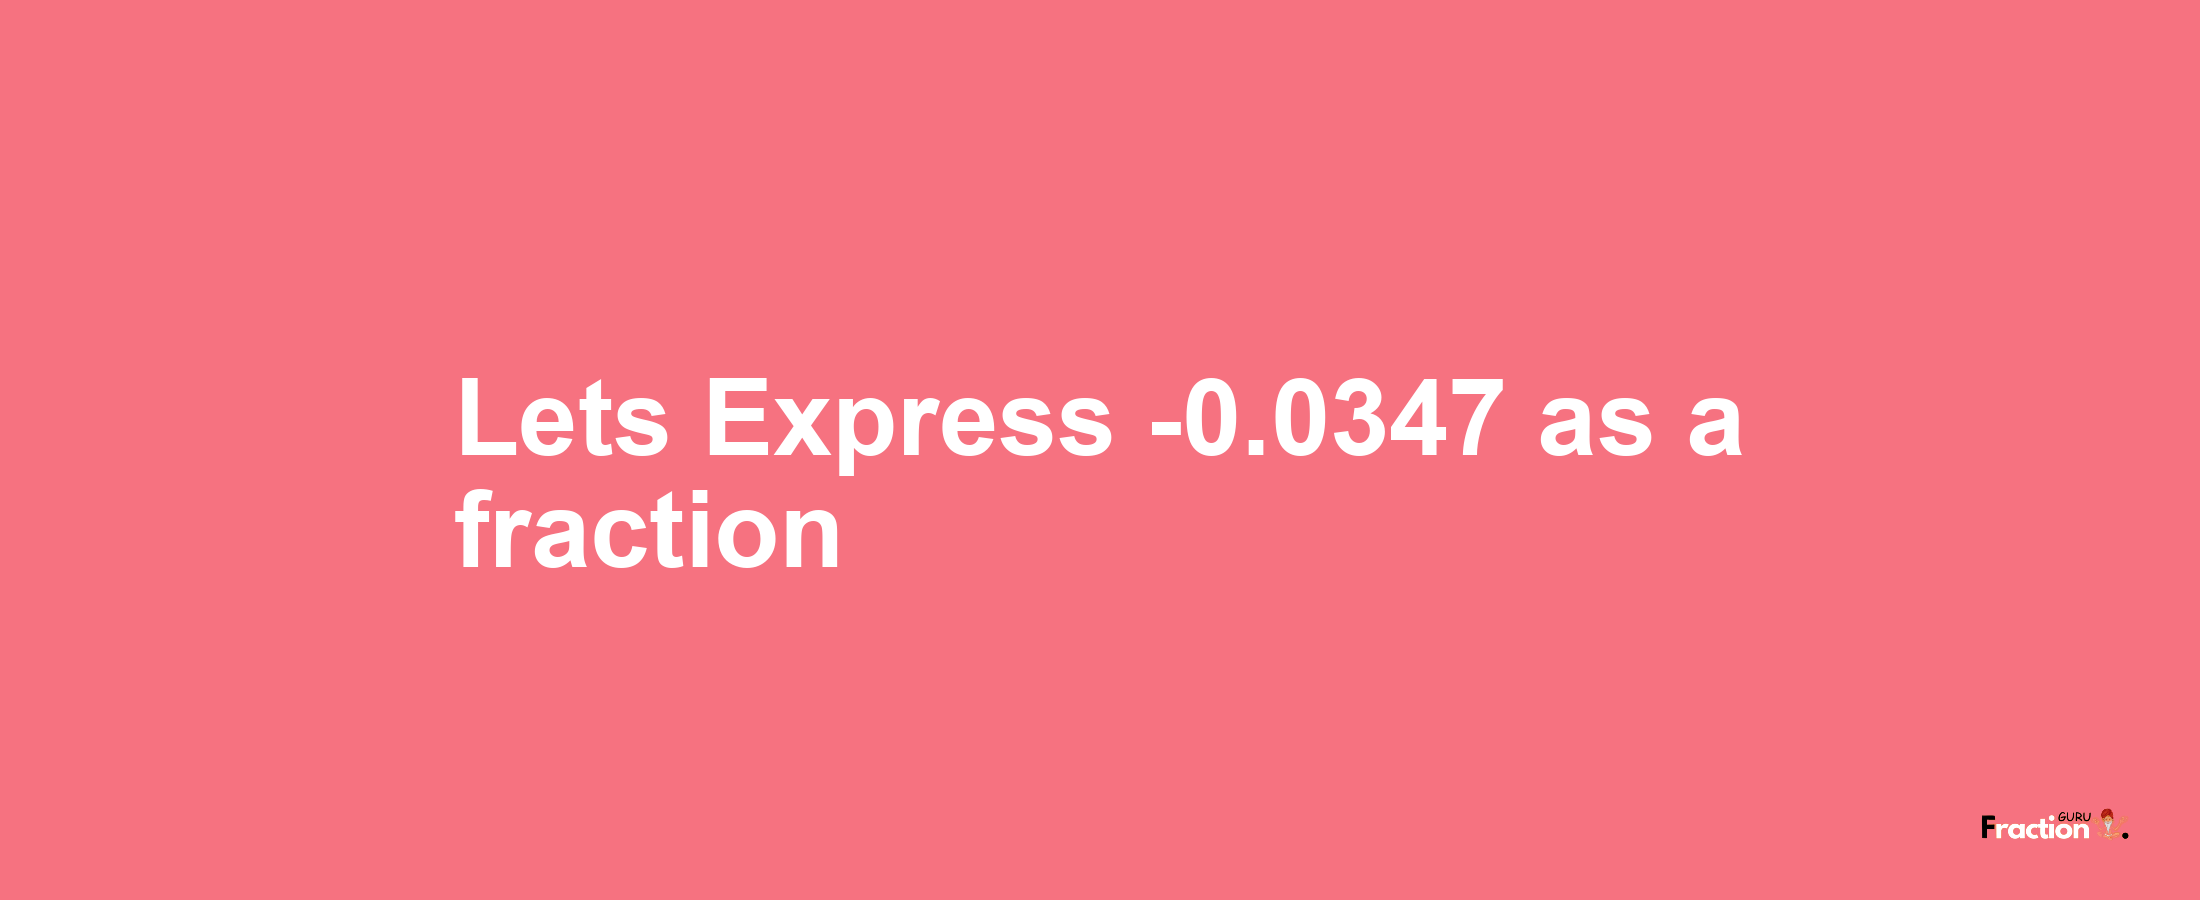 Lets Express -0.0347 as afraction